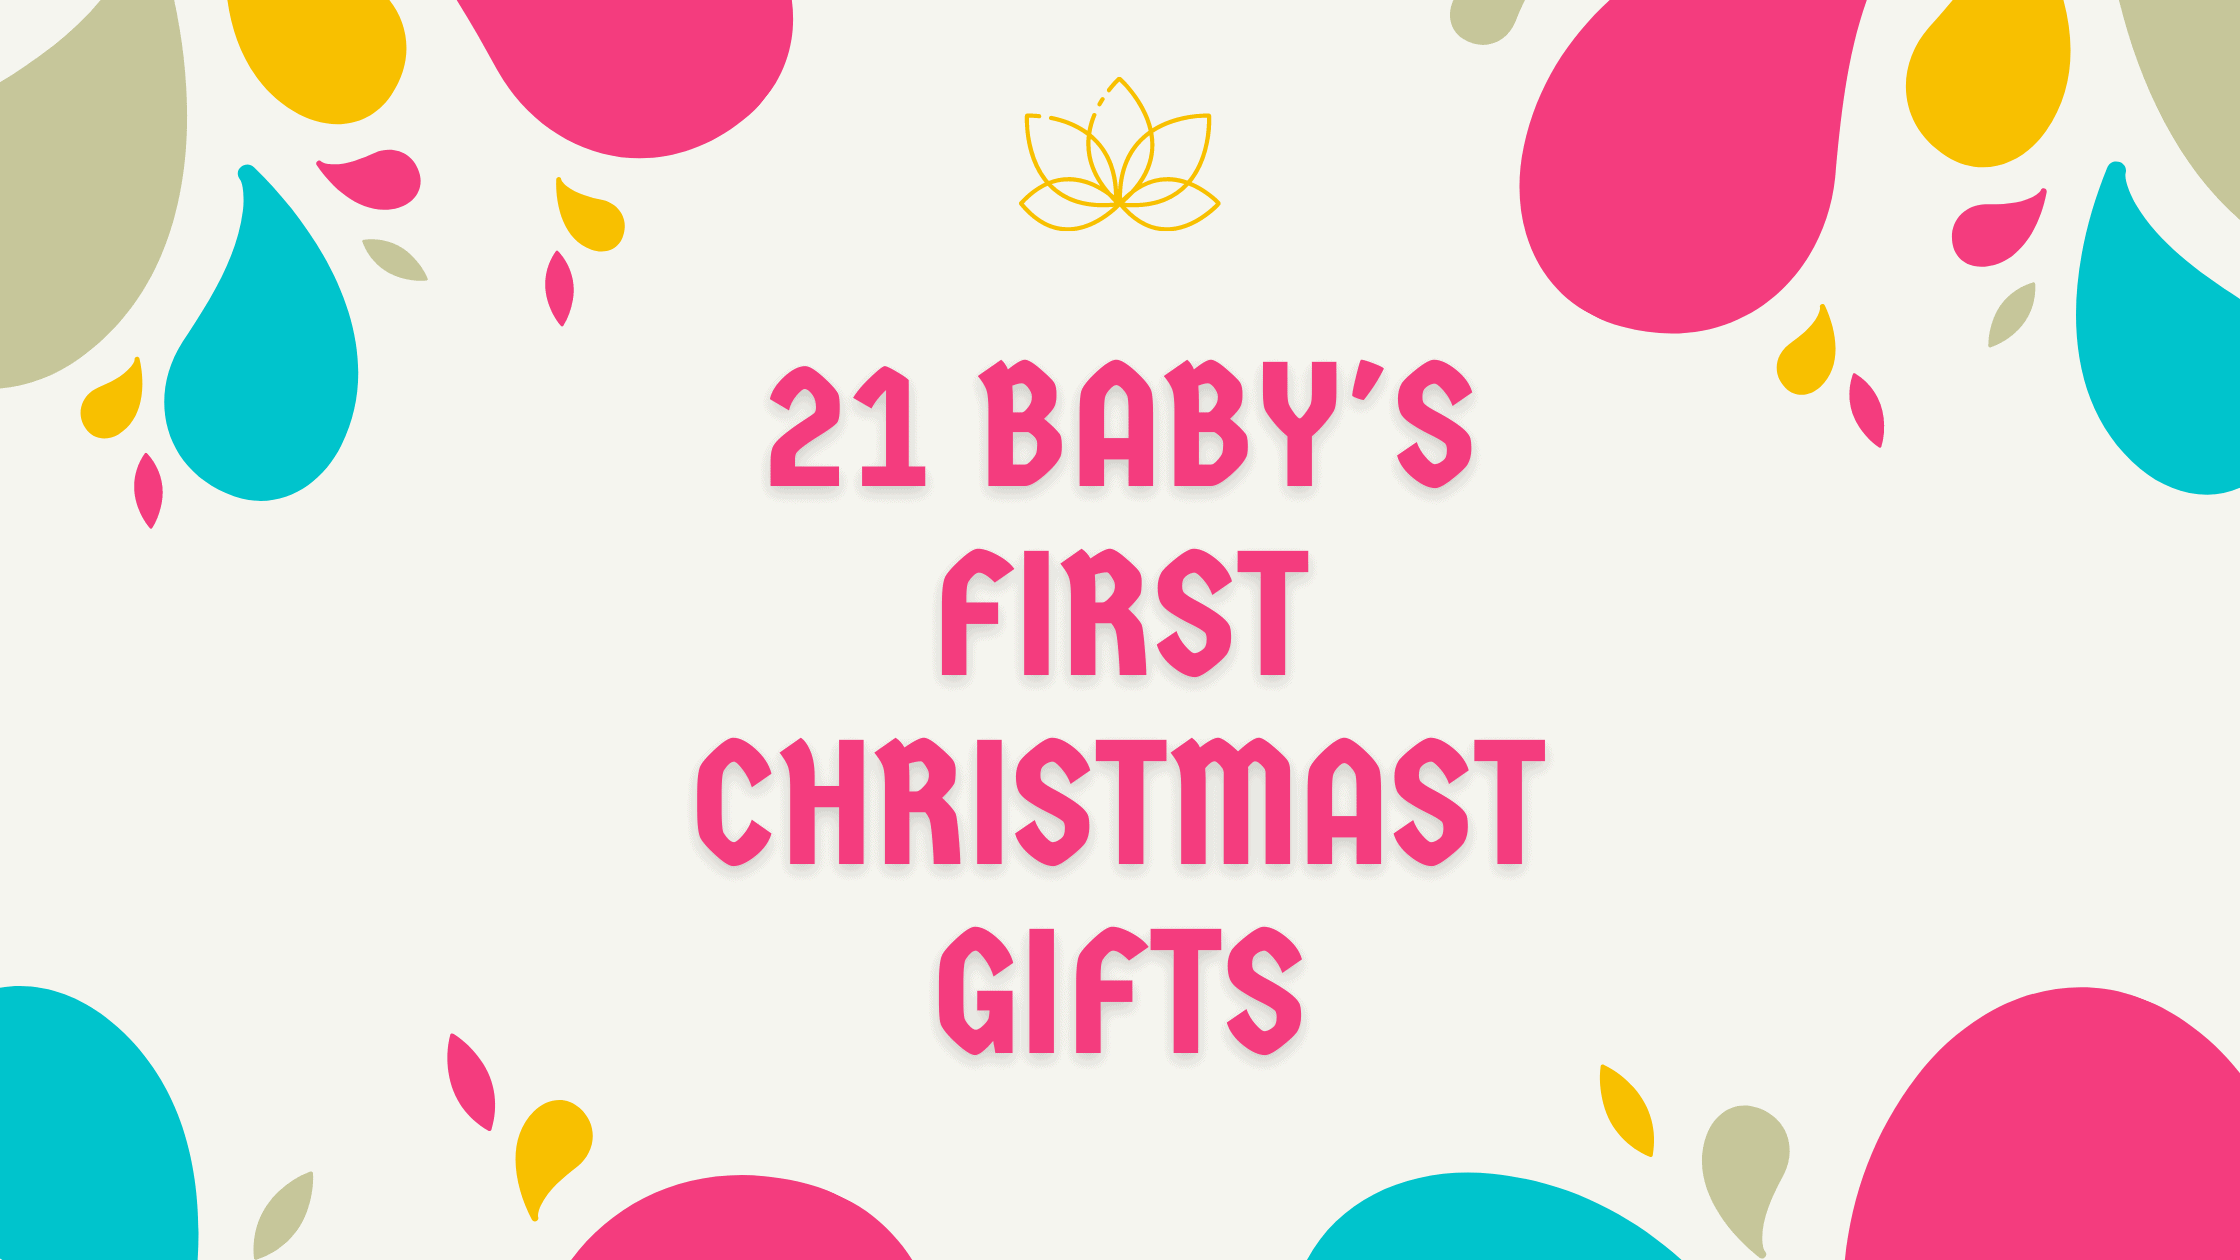 21 Best Baby’s First Christmas Gifts For a Very Special Holiday (2021)